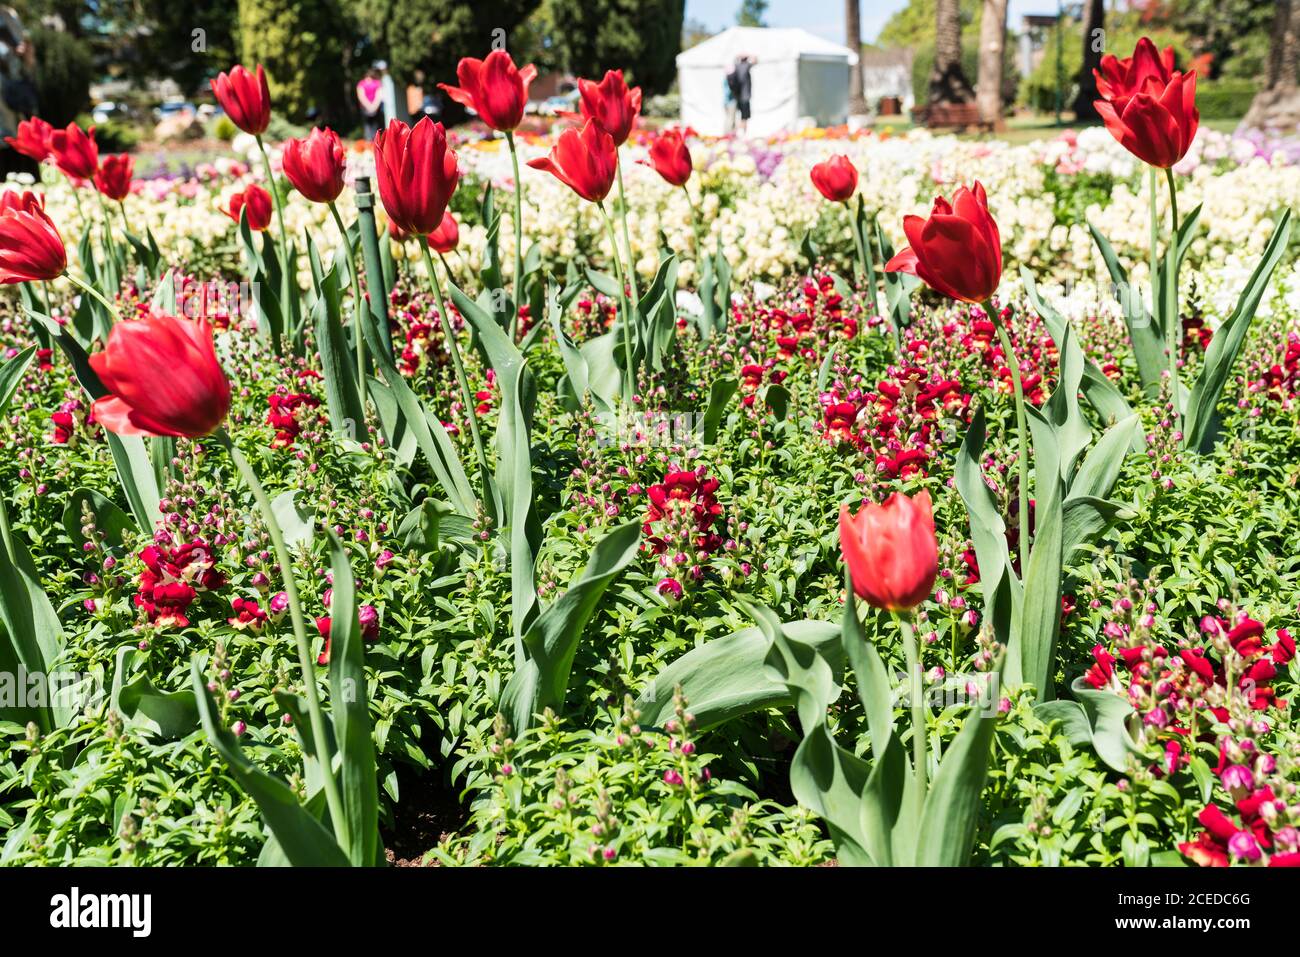 Beautiful floral display in Queens Park during Toowoomba's Carnival of Flowers with red tulips, red and white snapdragons Stock Photo